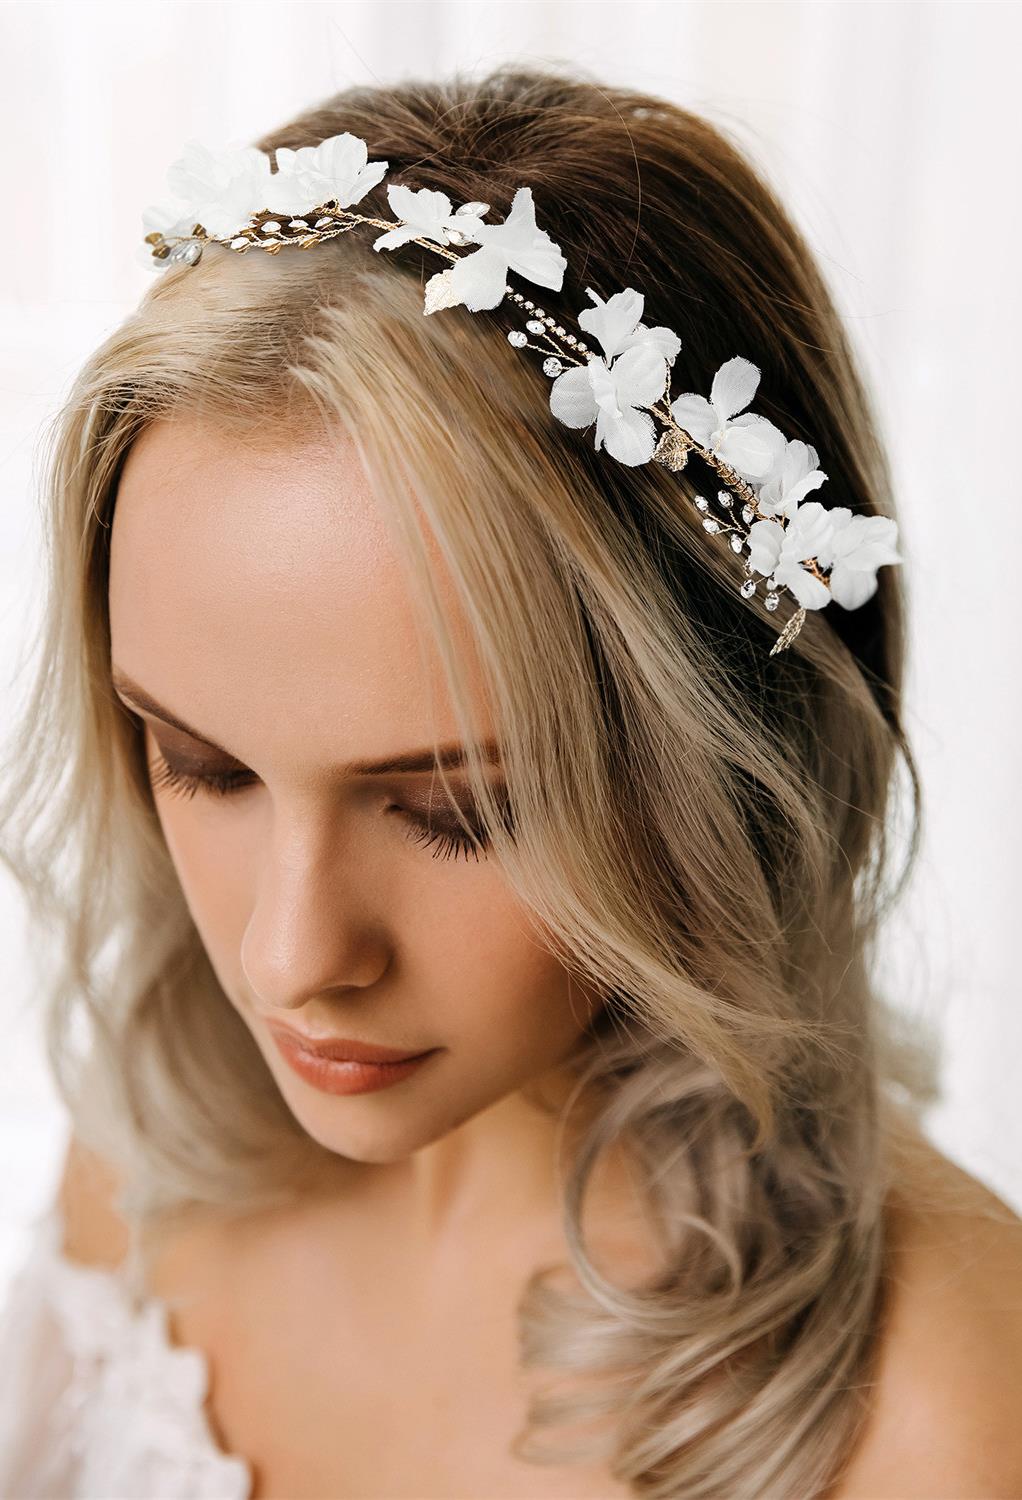 AW White Flower Headband Fairy Crown Crystal, Combs & Clips, 22.99 ...